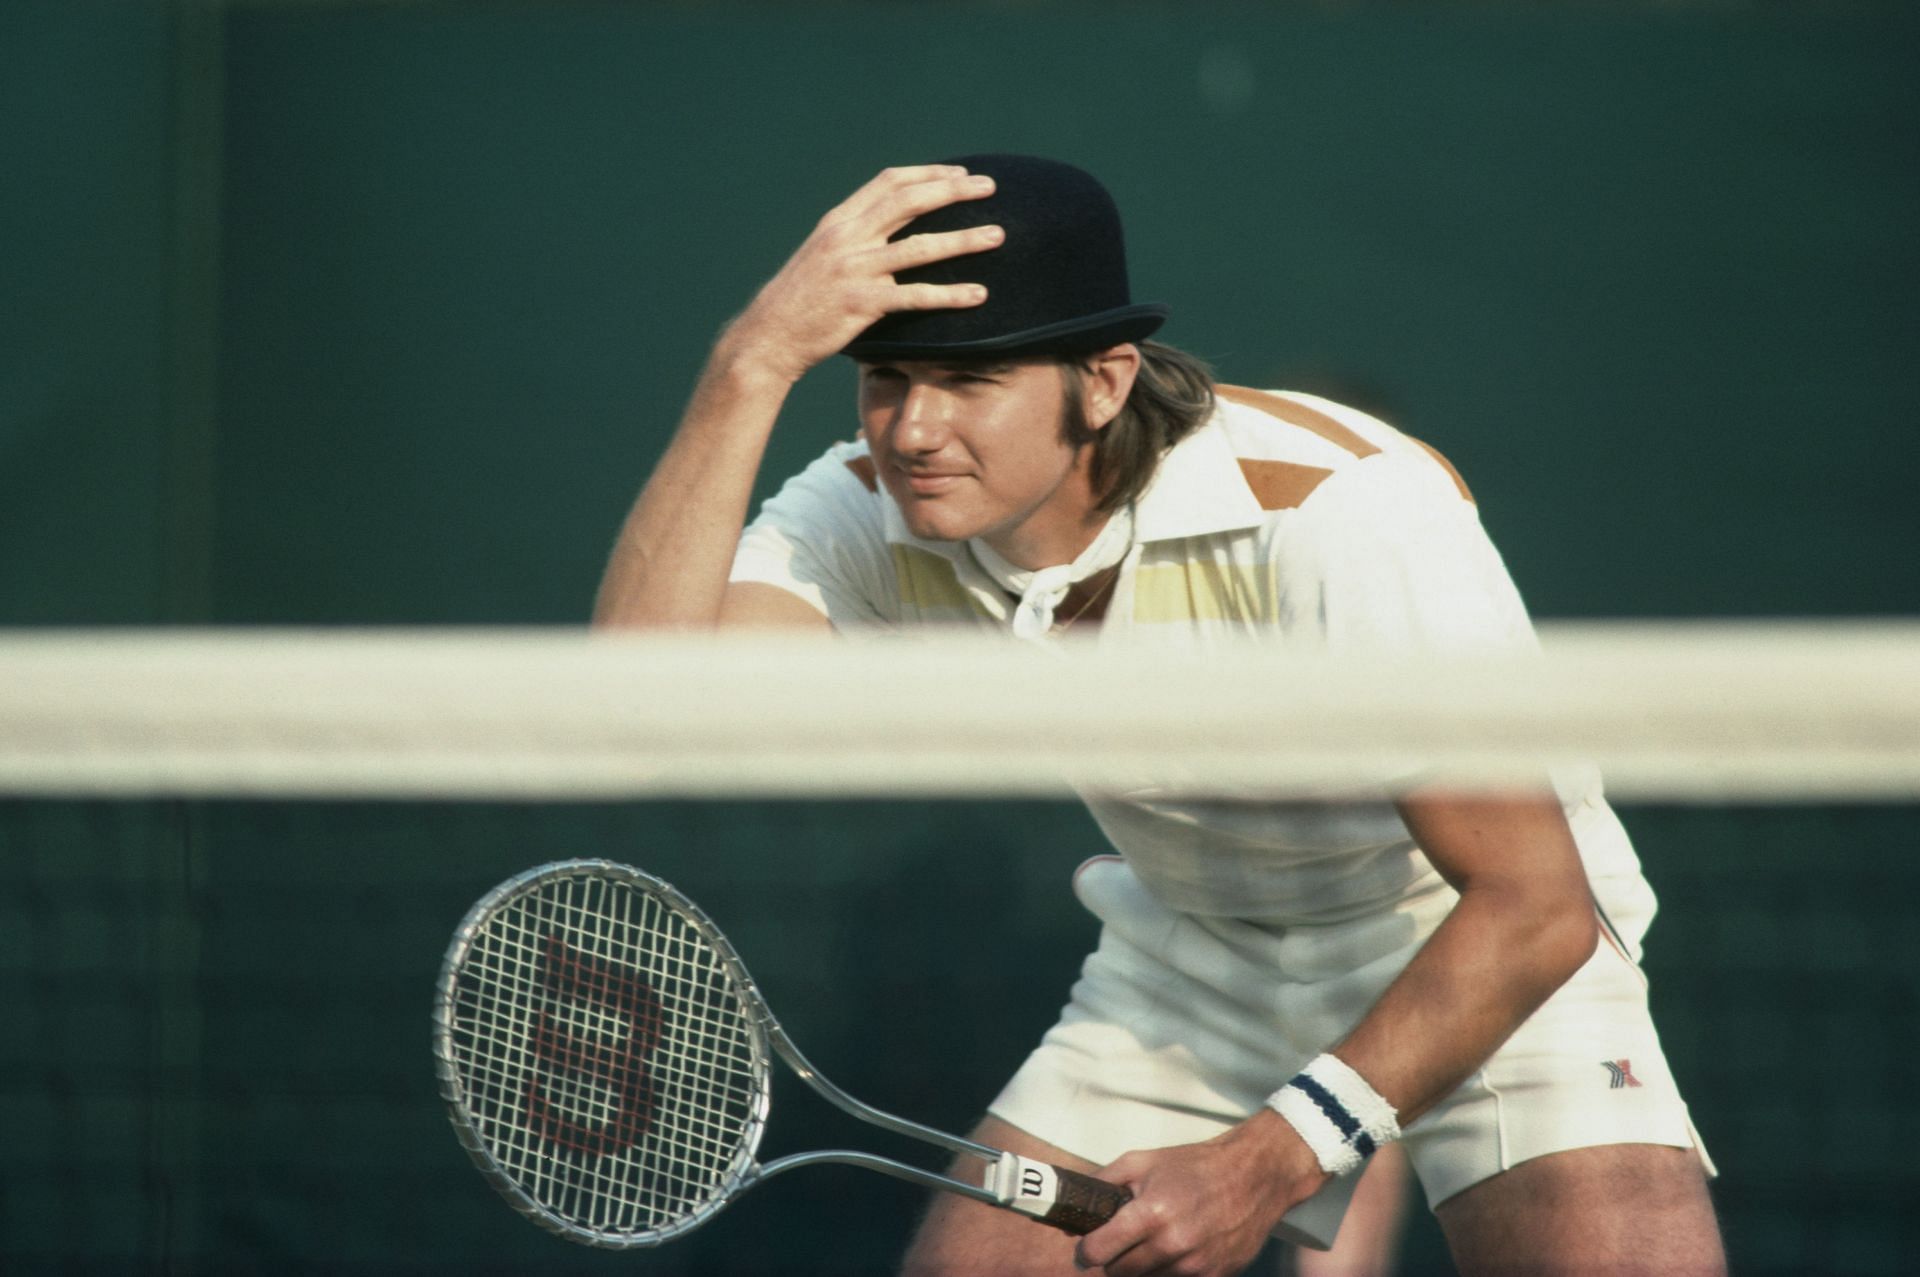 Jimmy Connors at the Wimbledon Championship in 1976